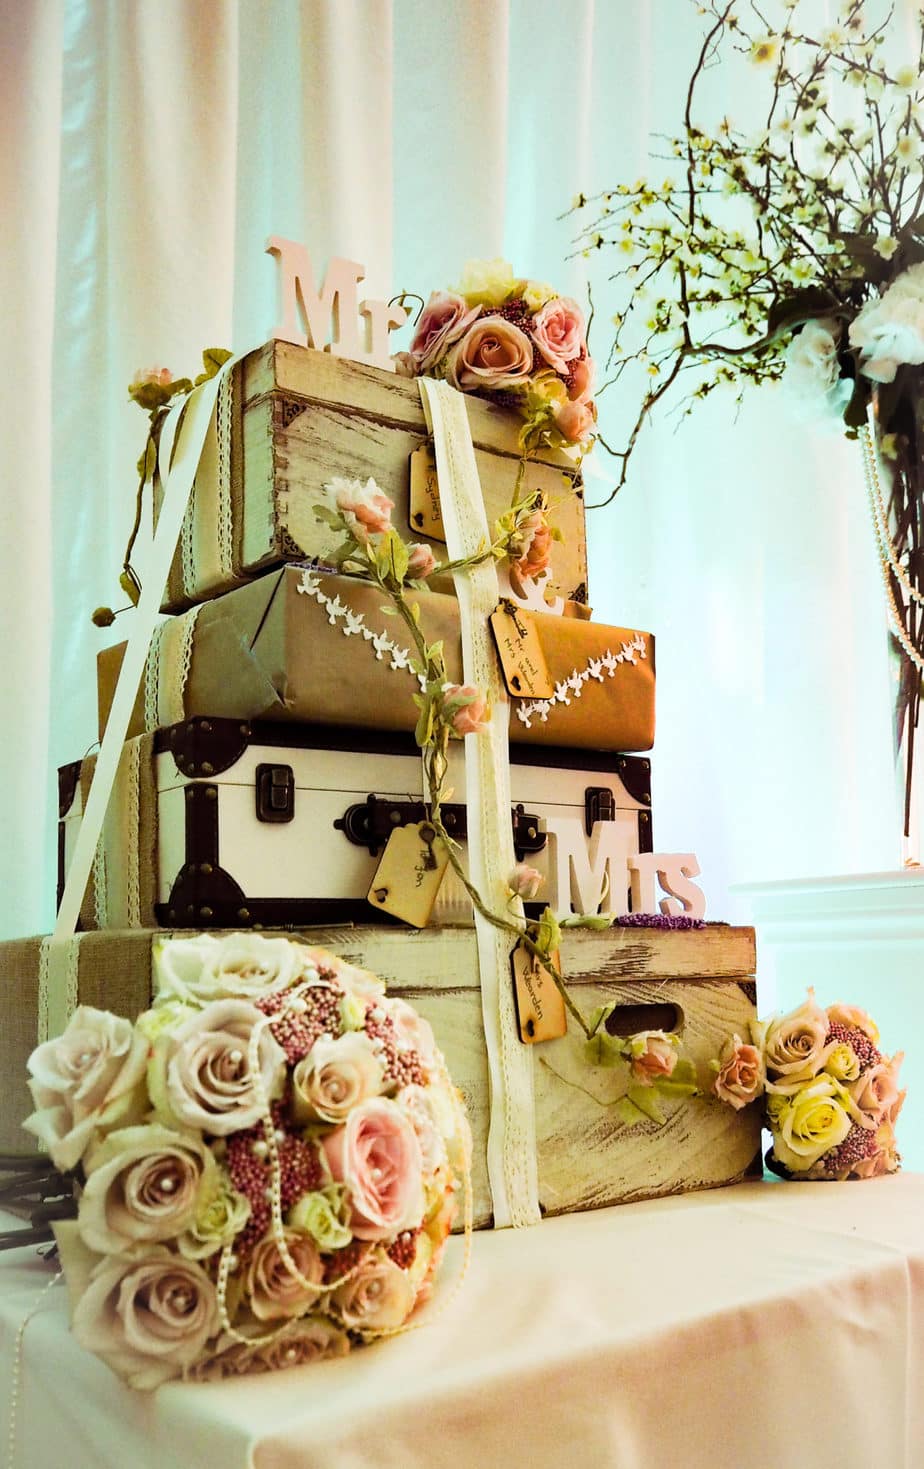 How to create the perfect wedding gift